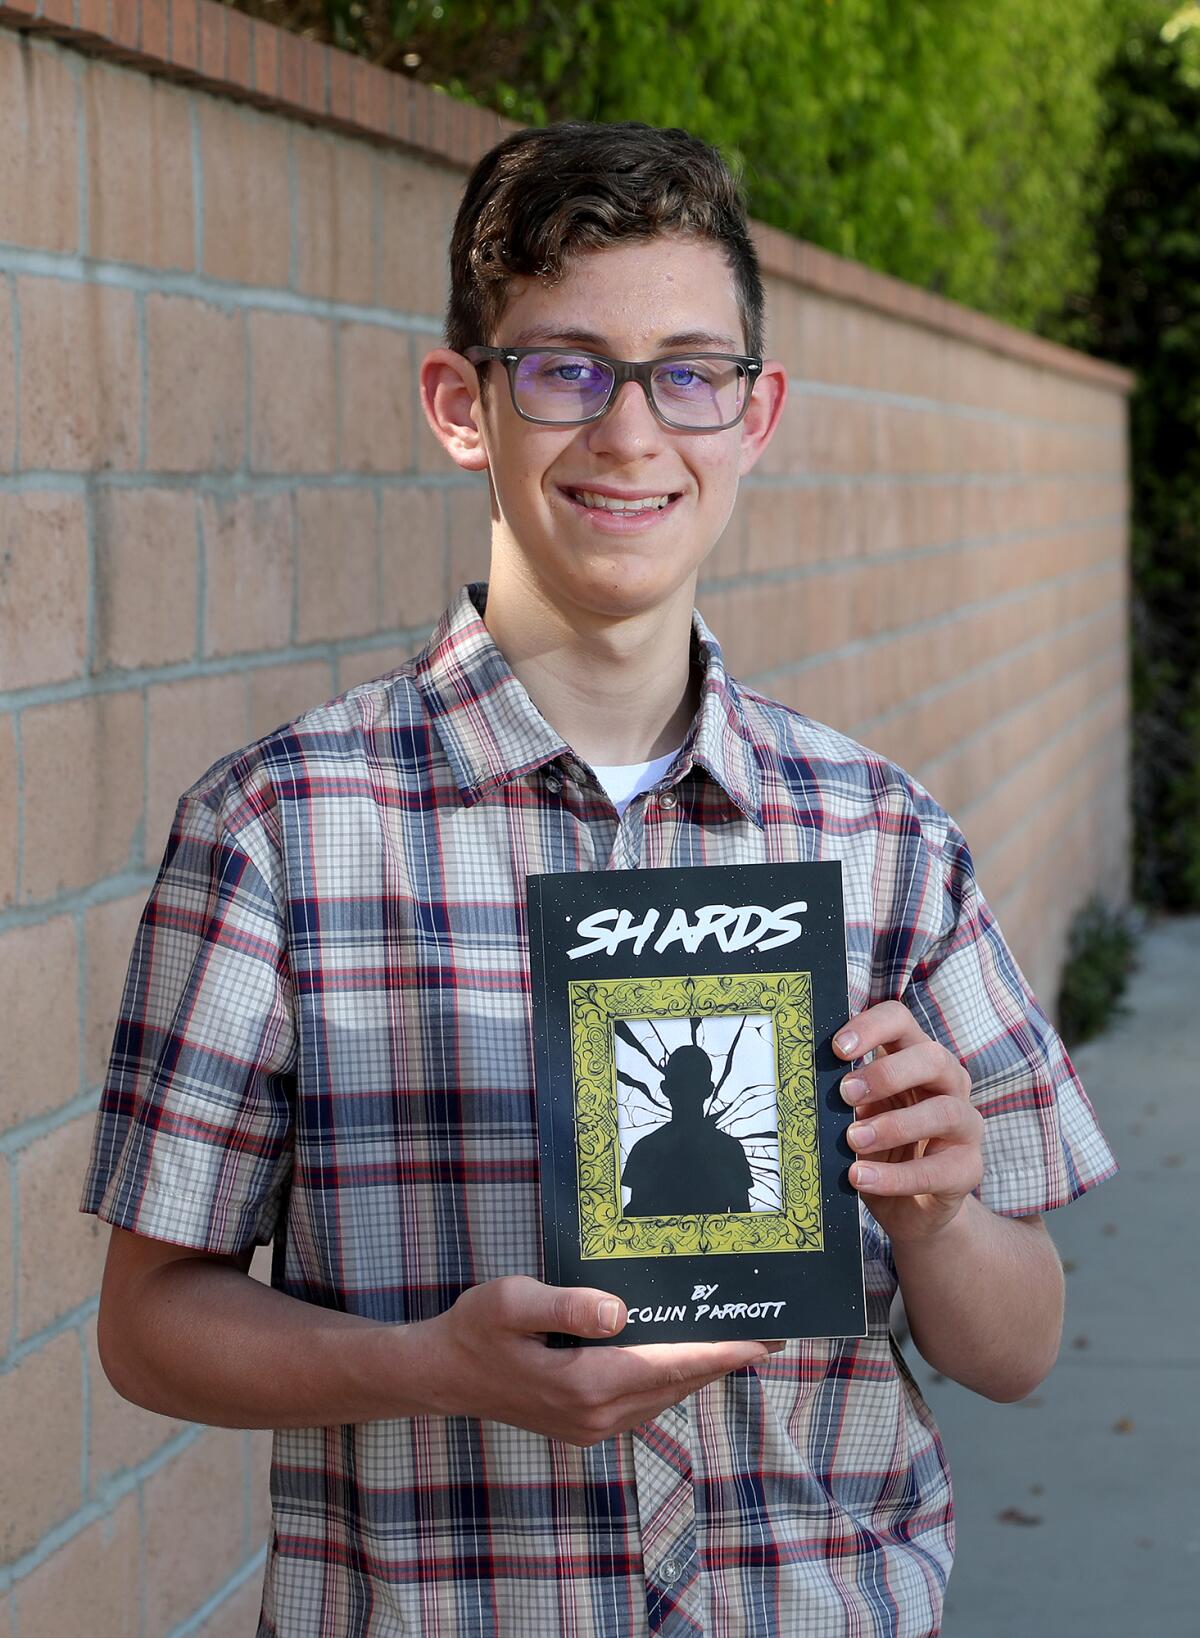 Huntington Beach High School junior Colin Parrott, 16, self-published a poetry book that was written over a two-month period.